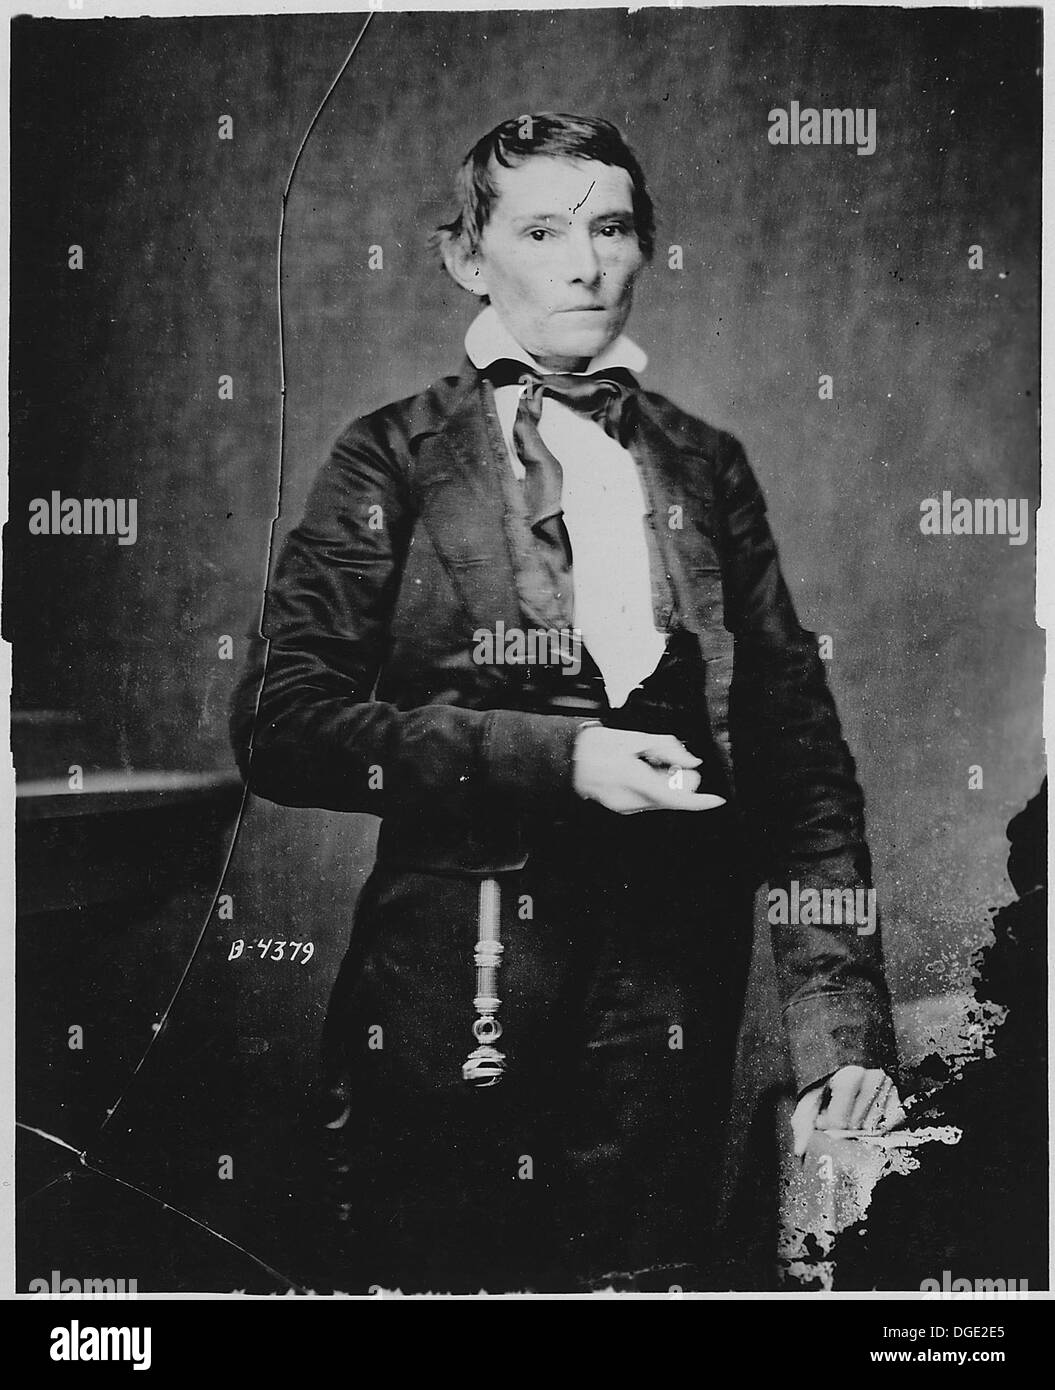 6 Sizes Details about   New Civil War Photo CSA Confederate Vice President Alexander Stephens 